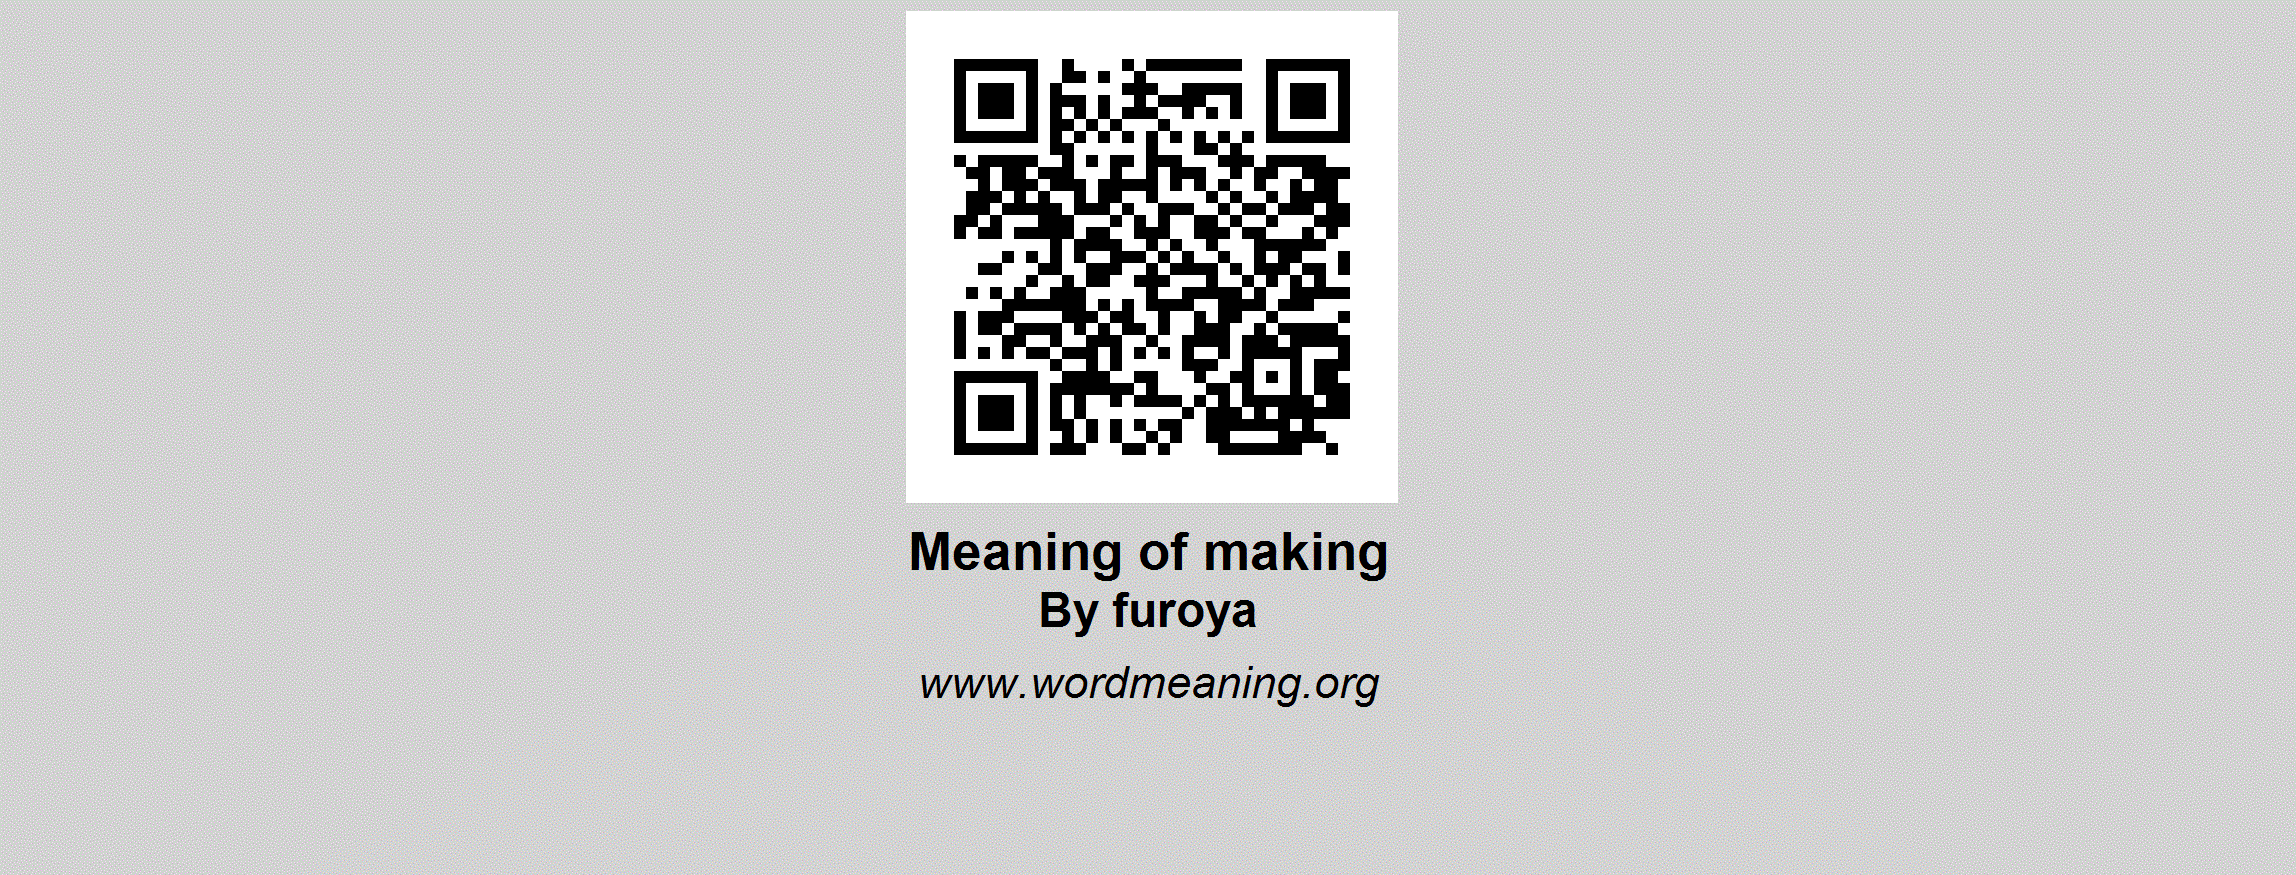 MAKING Meaning  of making by furoya